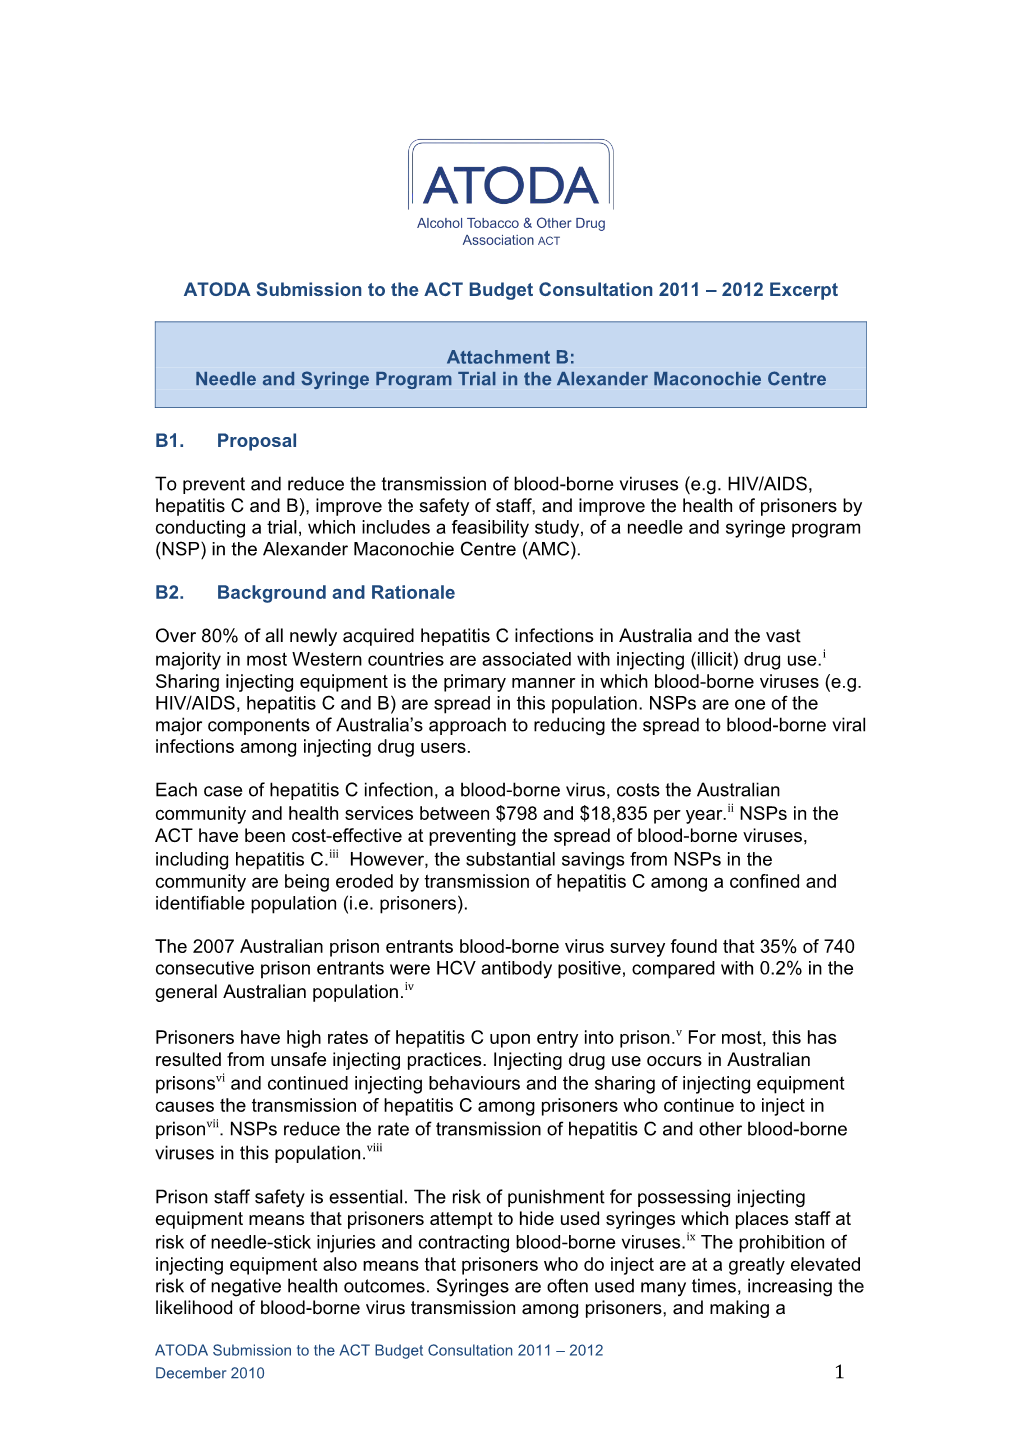 ATODA Submission to the ACT Budget Consultation 2011 2012 Excerpt